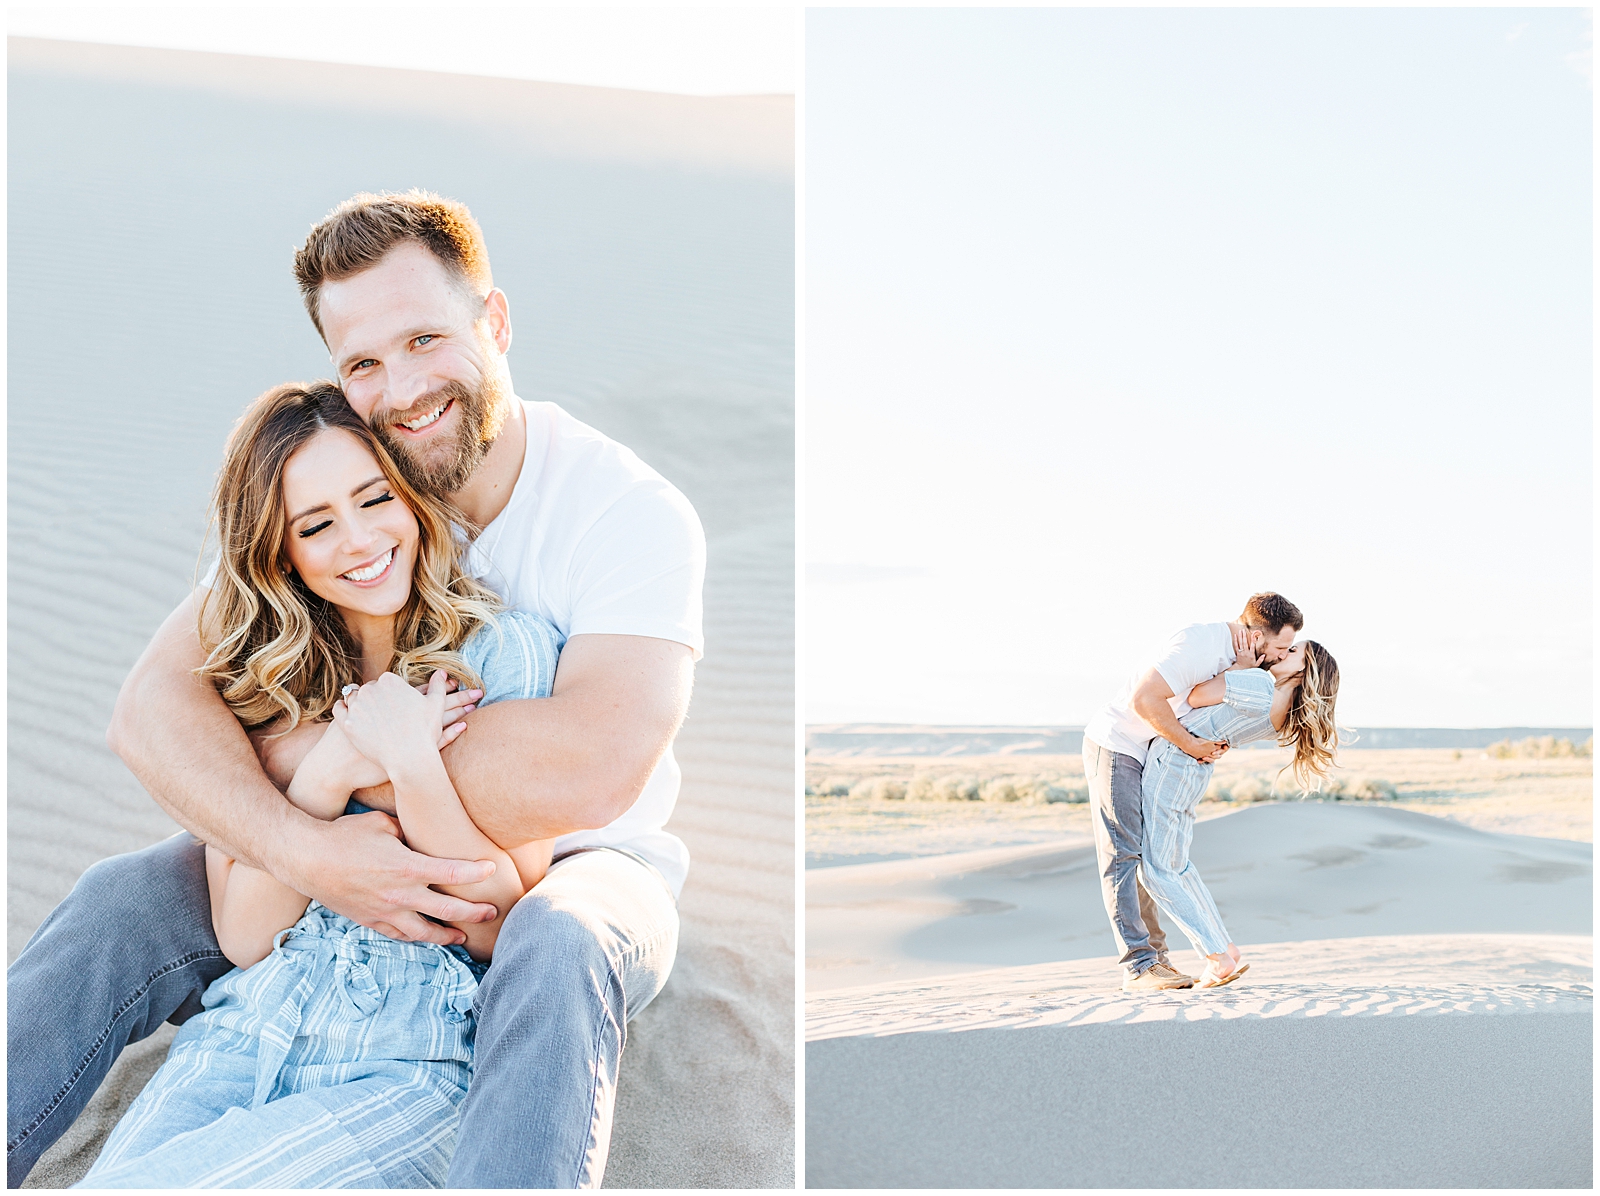 Dreamy Romantic Light and Airy Sand Dunes Engagement Session